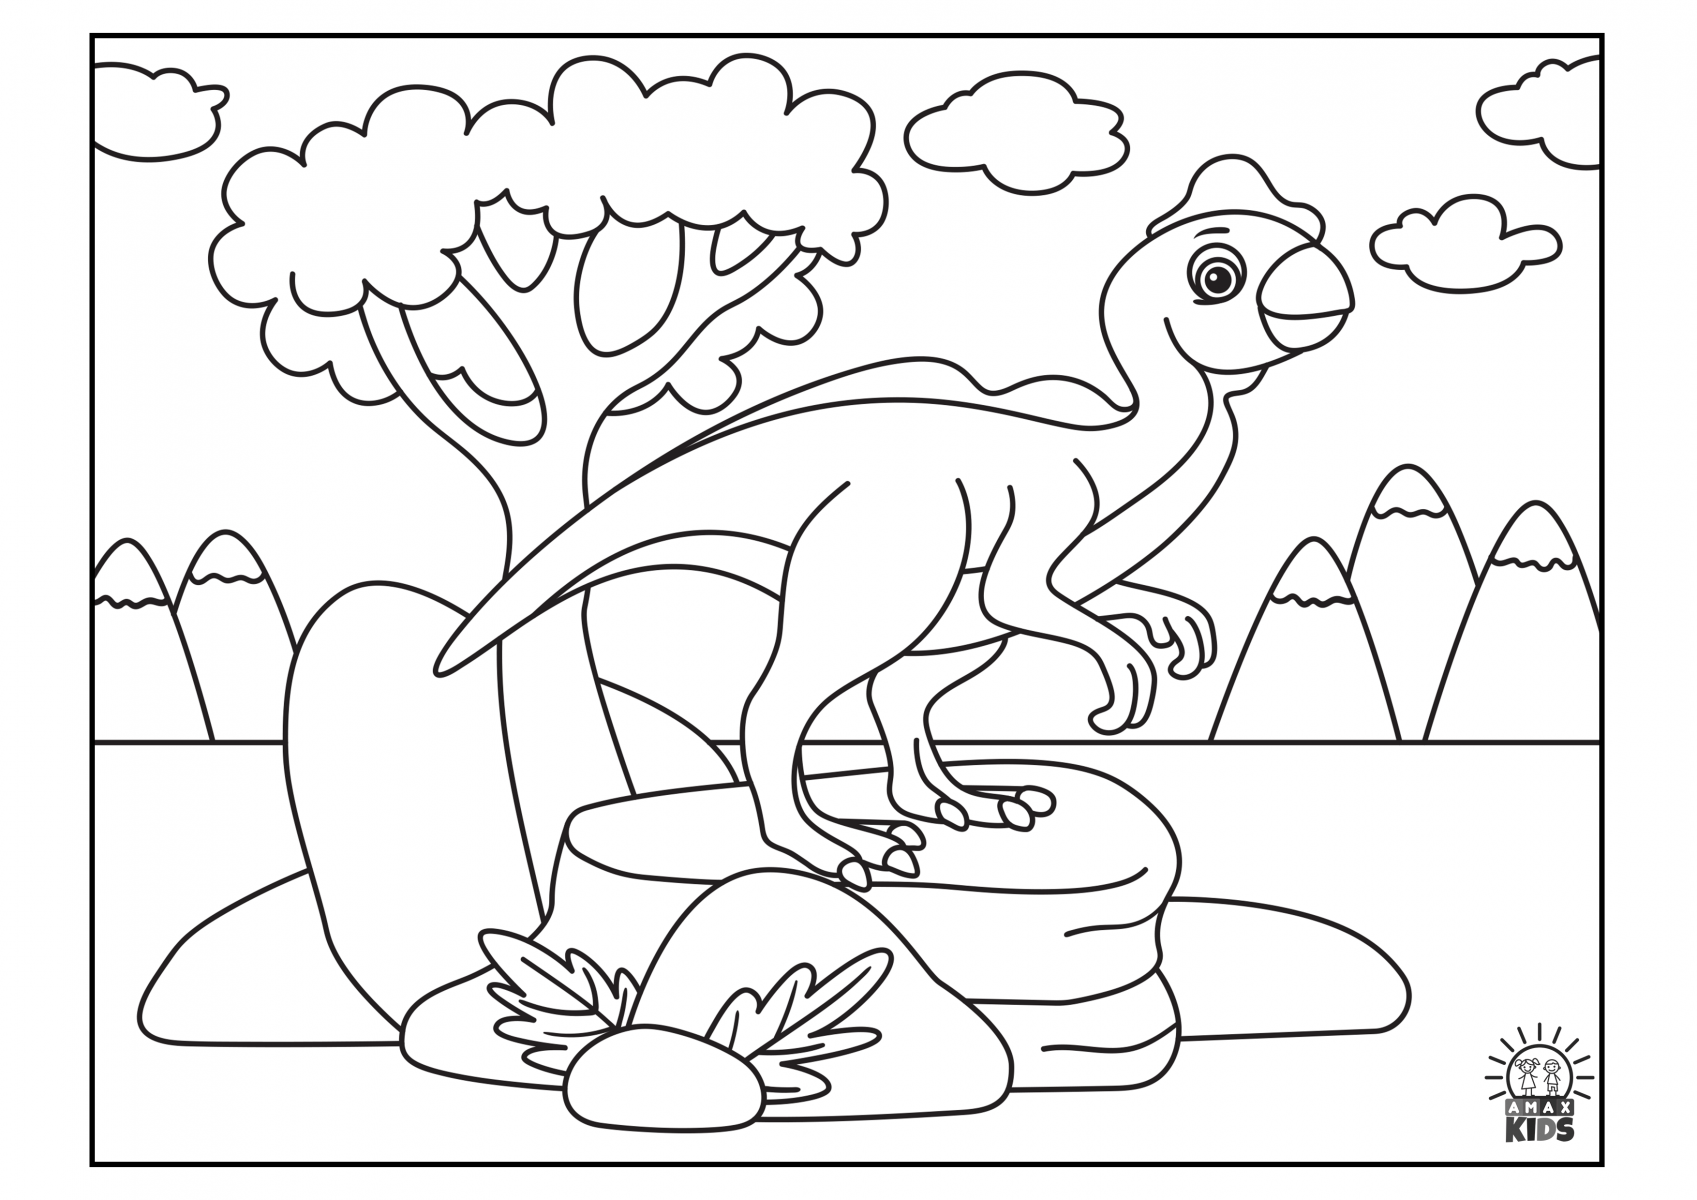 dinosaurs coloring pages with names dinosaur coloring pages to